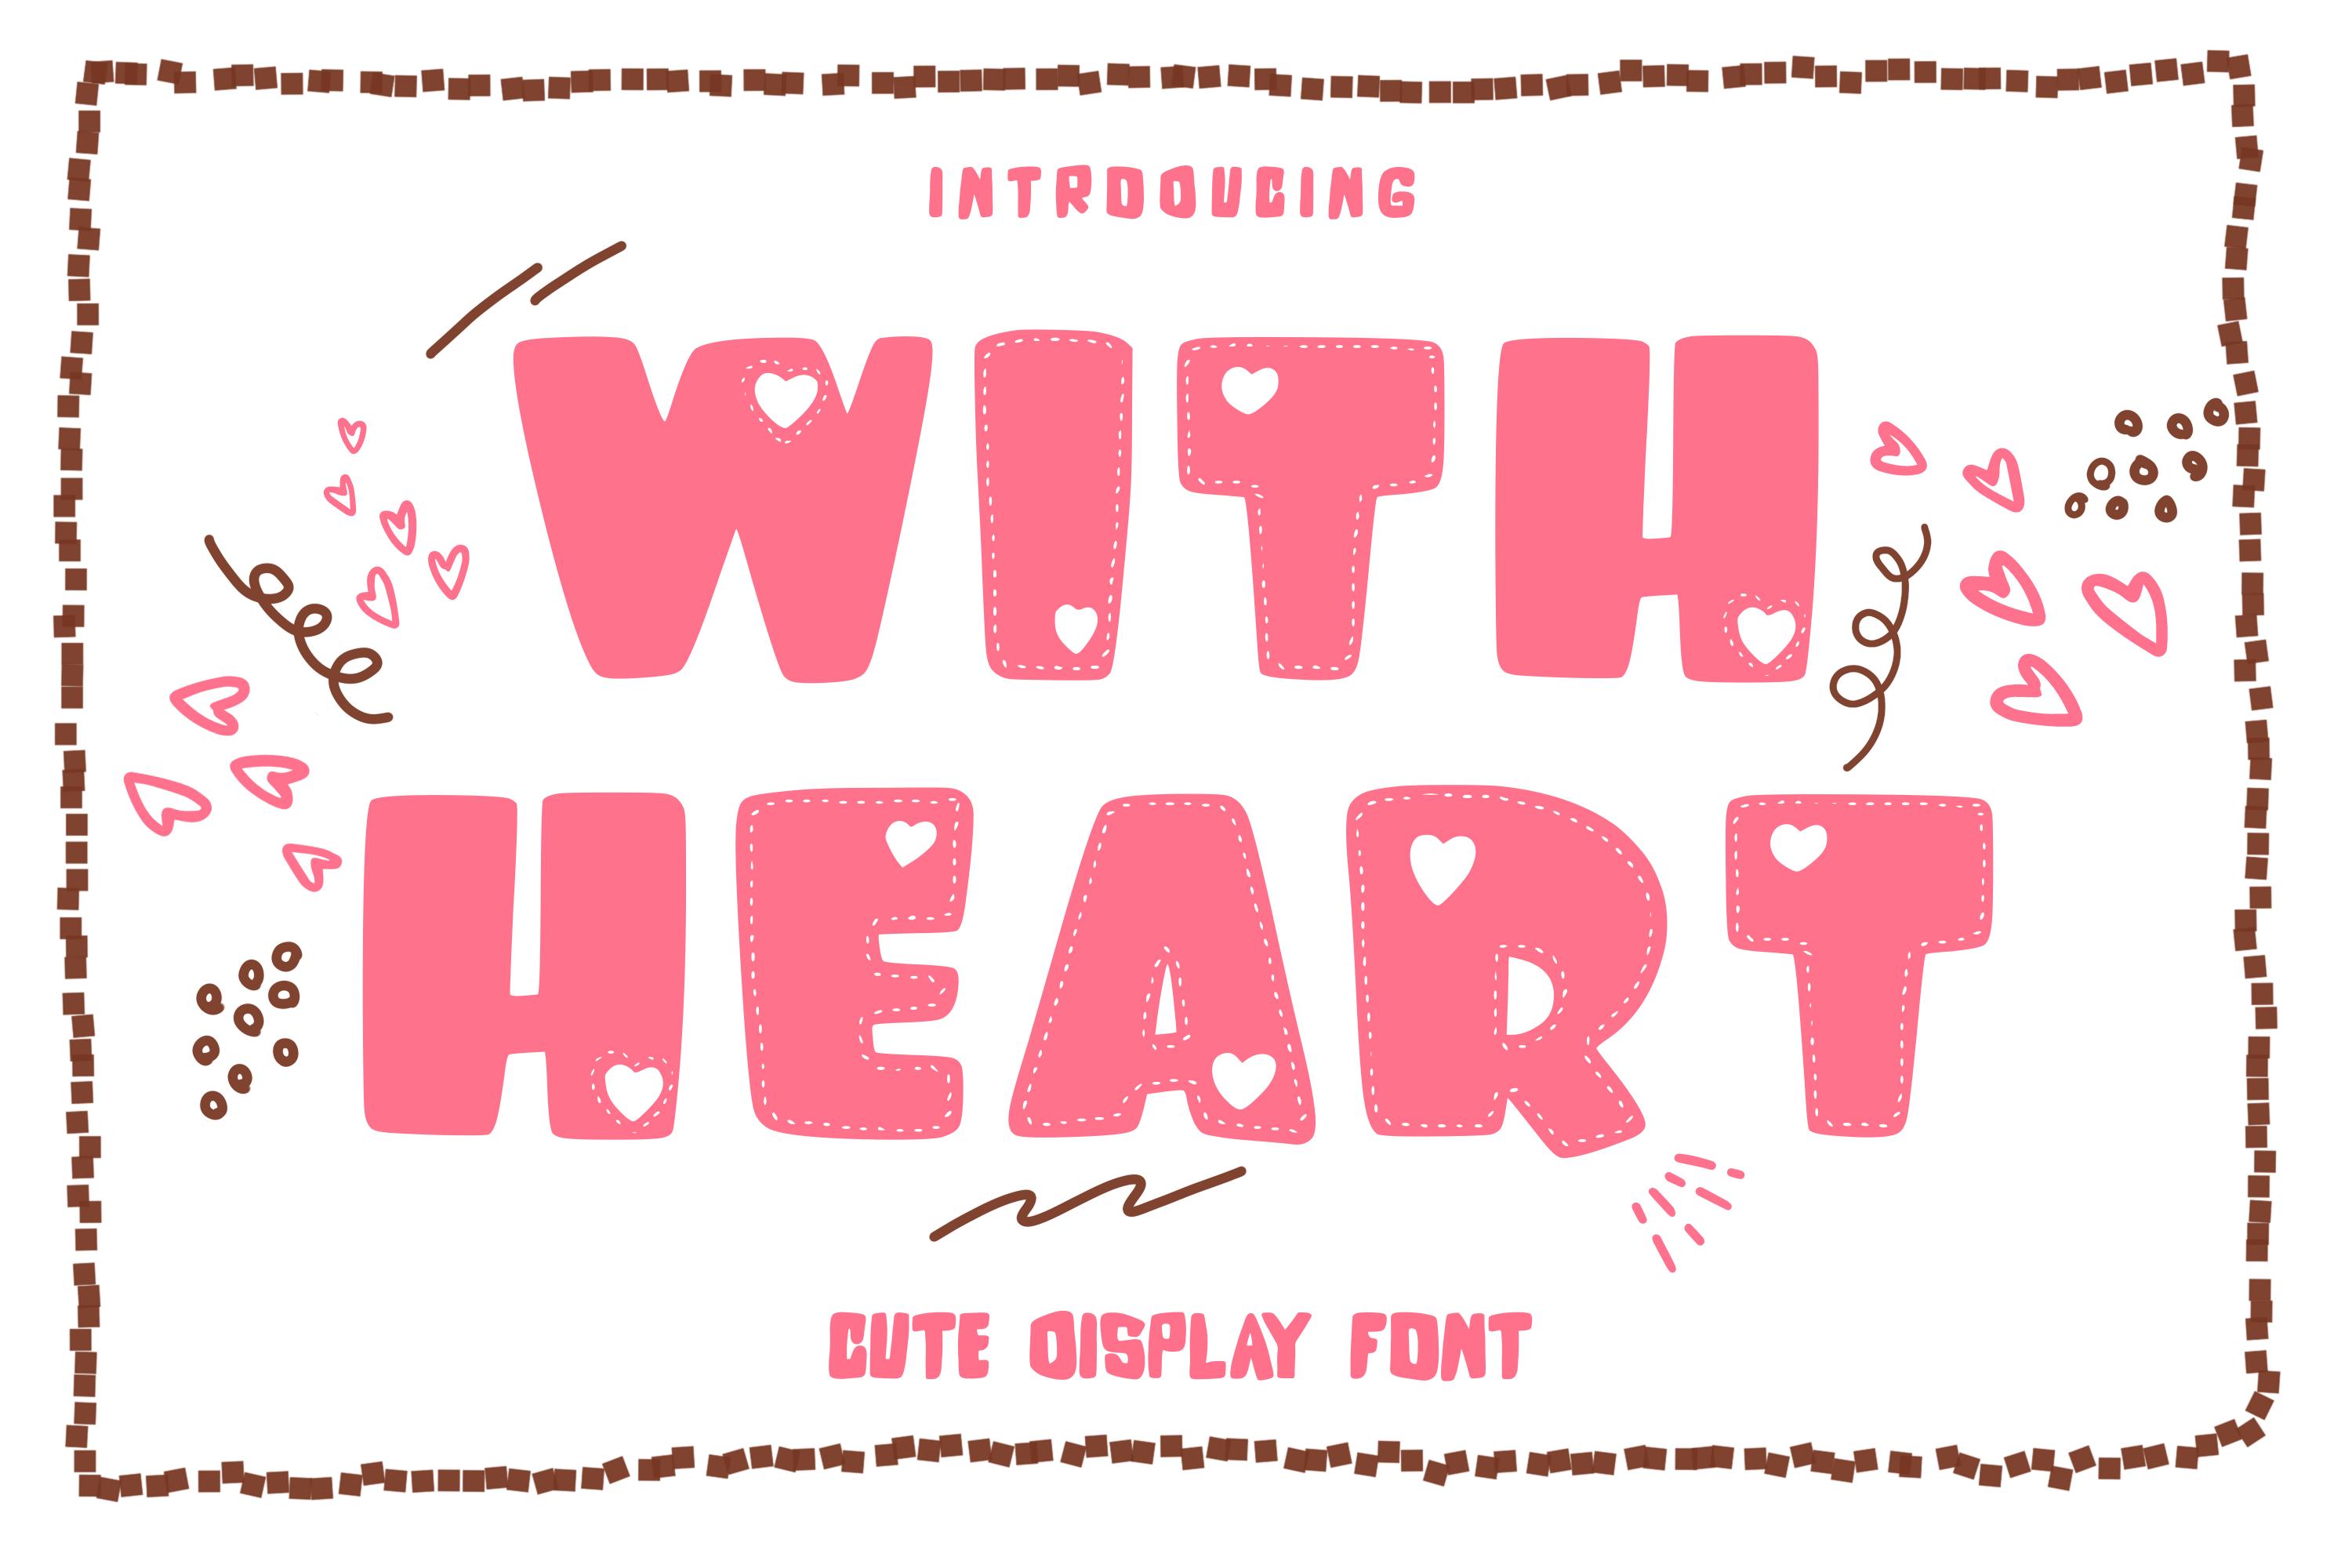 With Heart Font